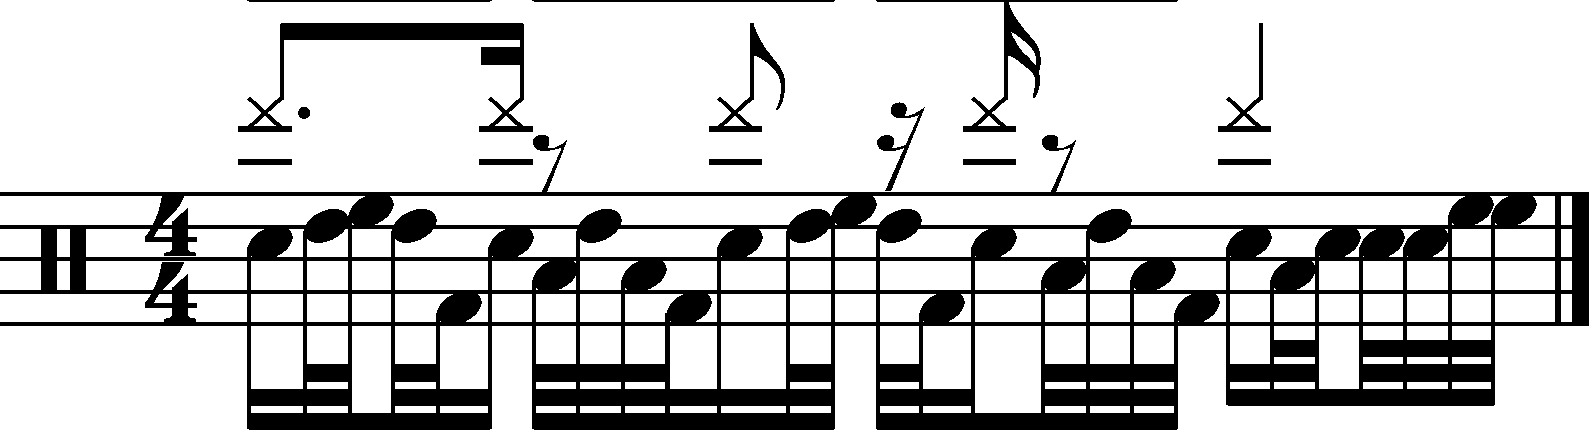 Syncopated 16th note 33334 fills